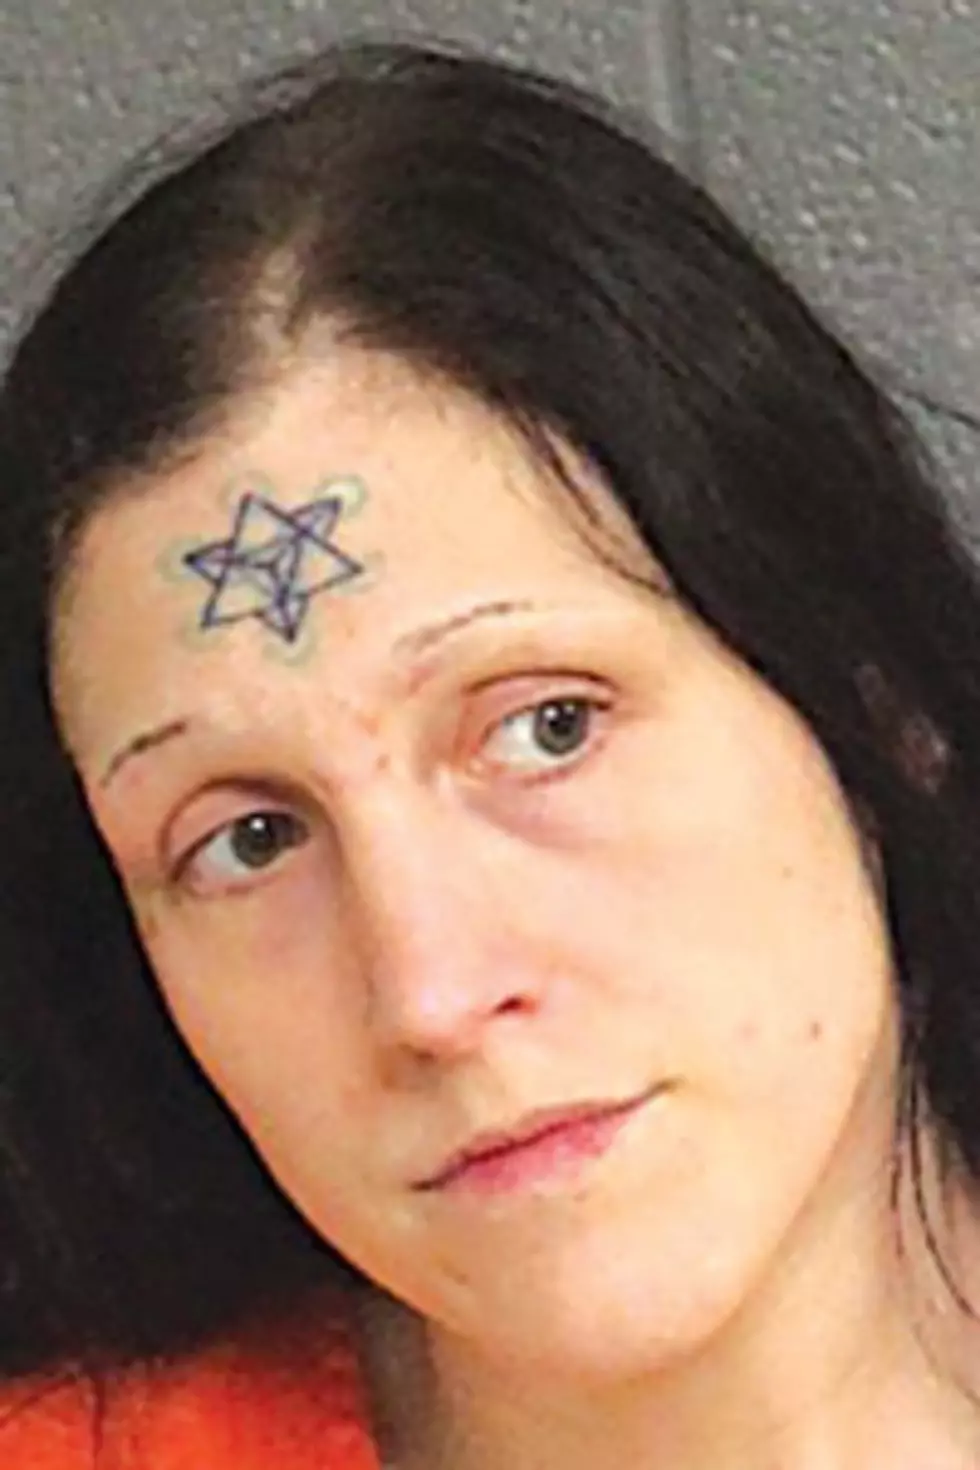 Woman’s Forehead Tattoo Leads To Arrest After Covering Face With Bandana